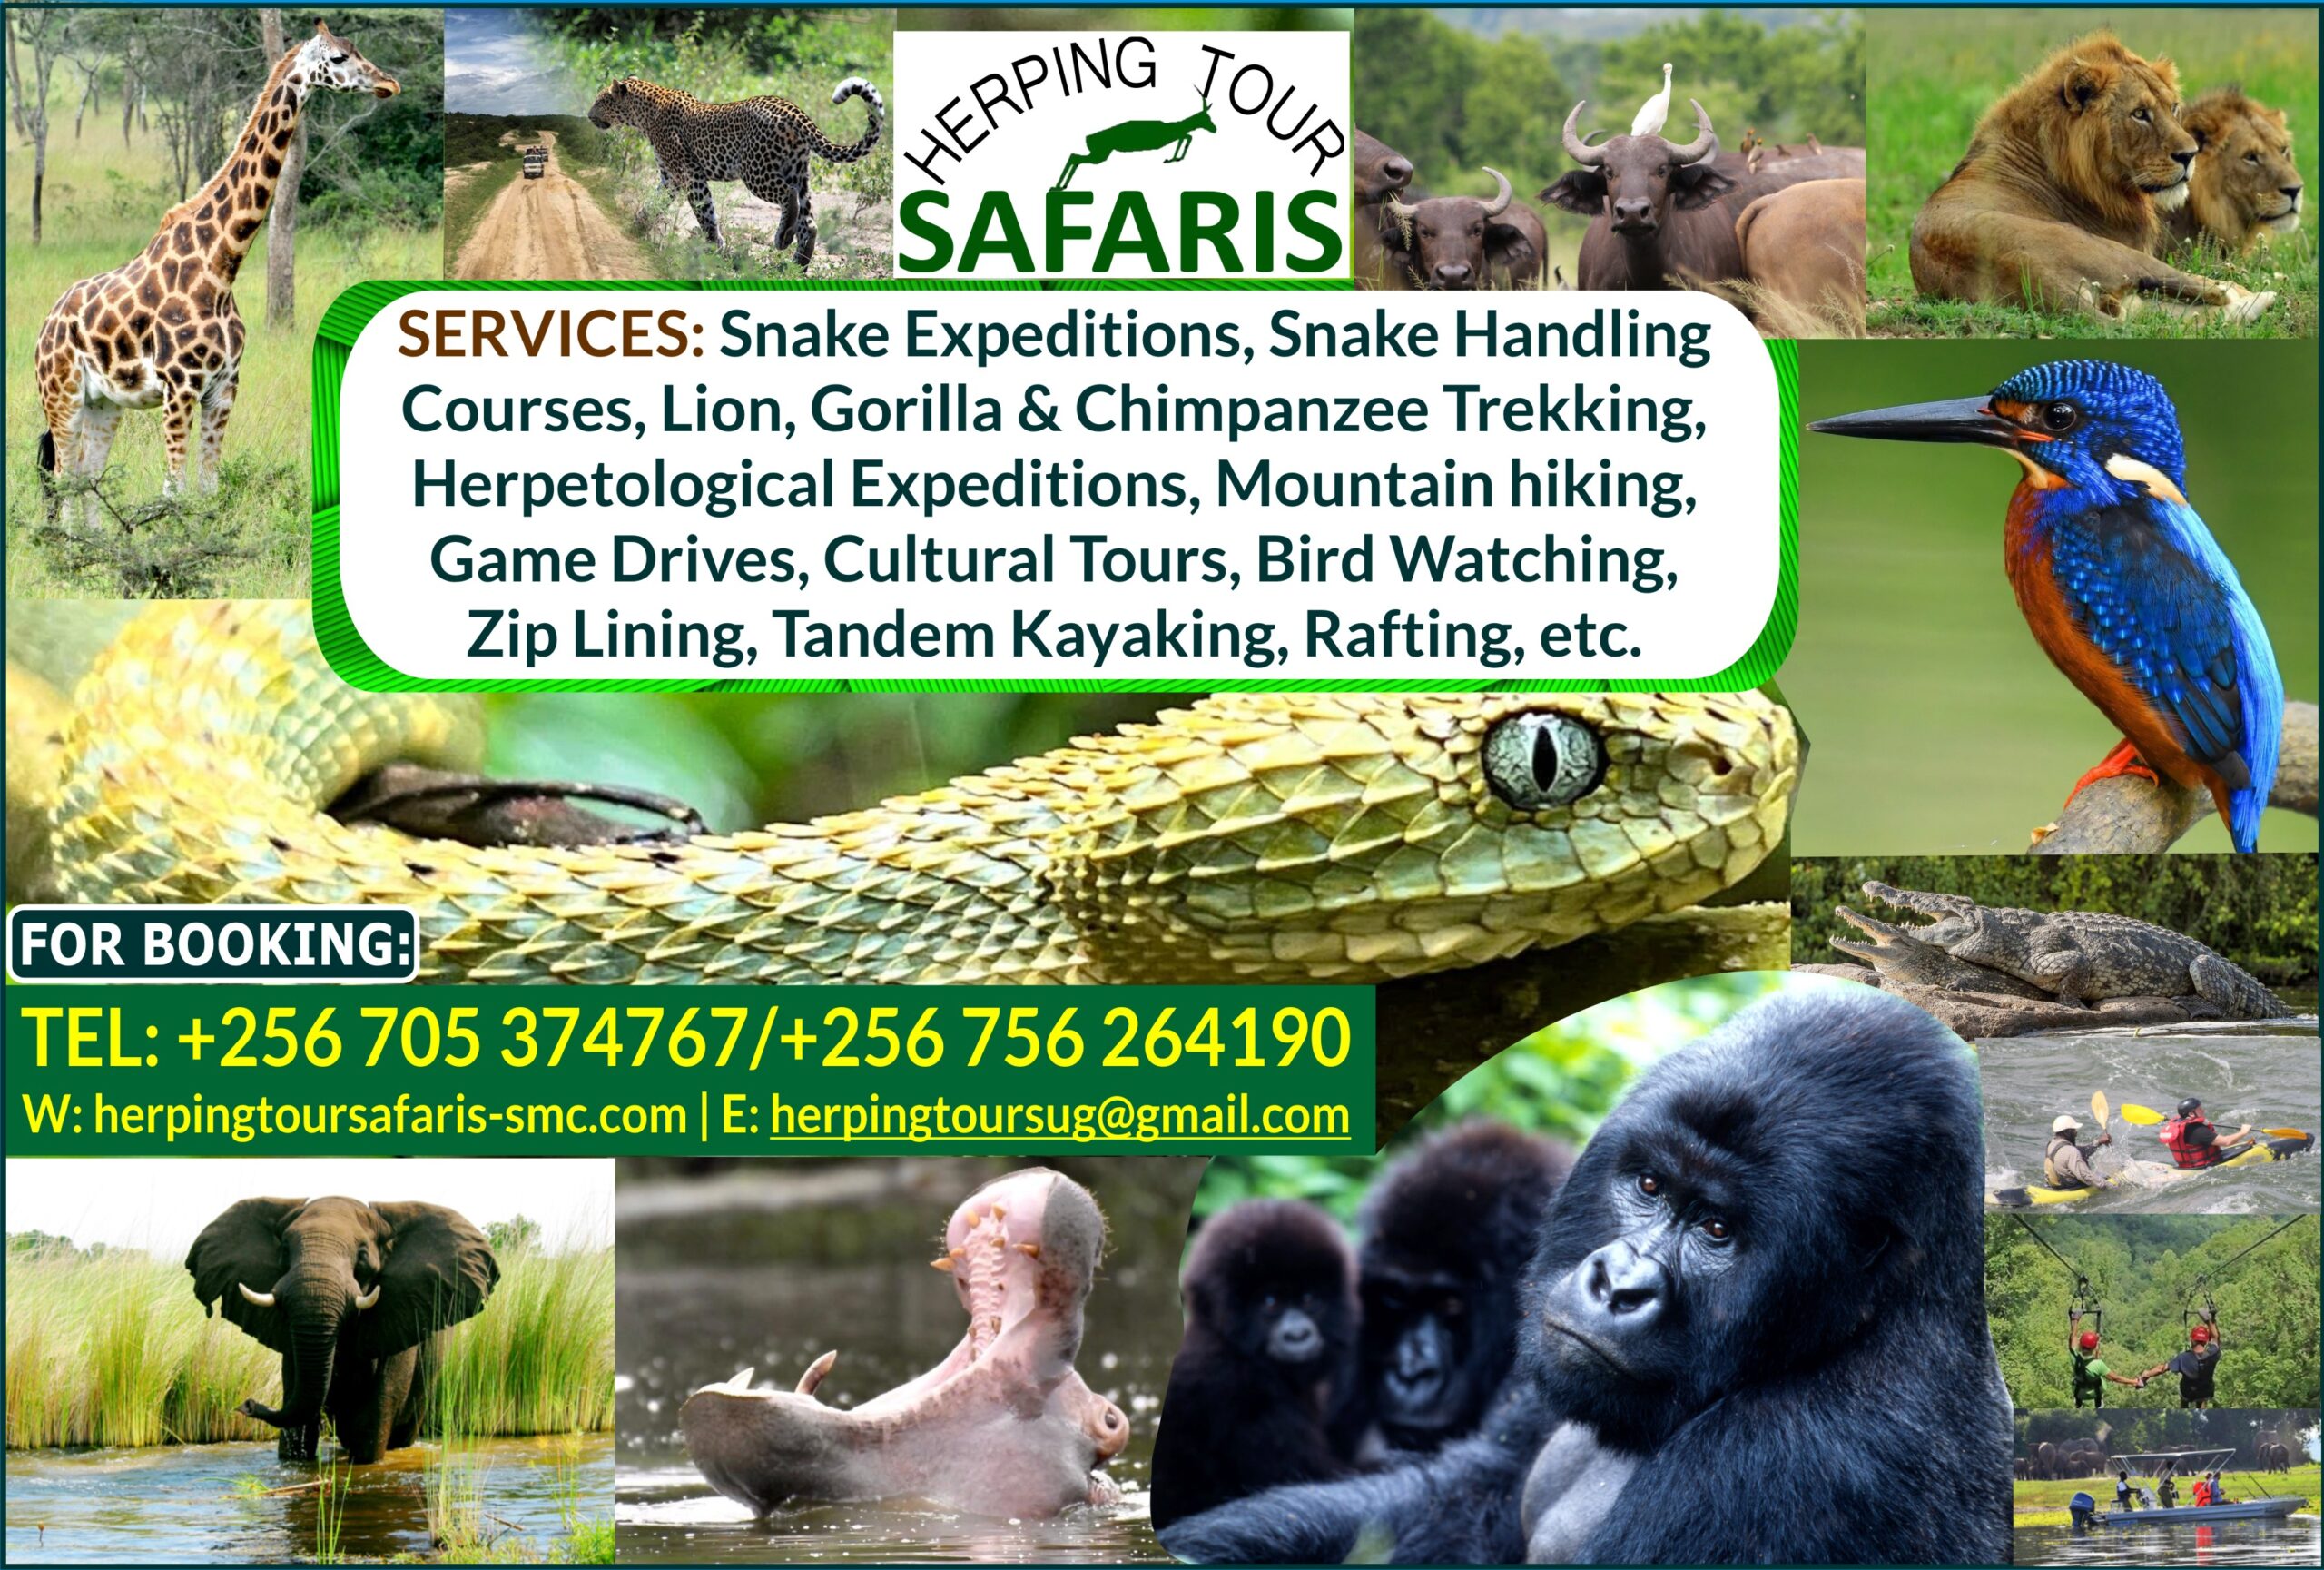 Herping Tours Services